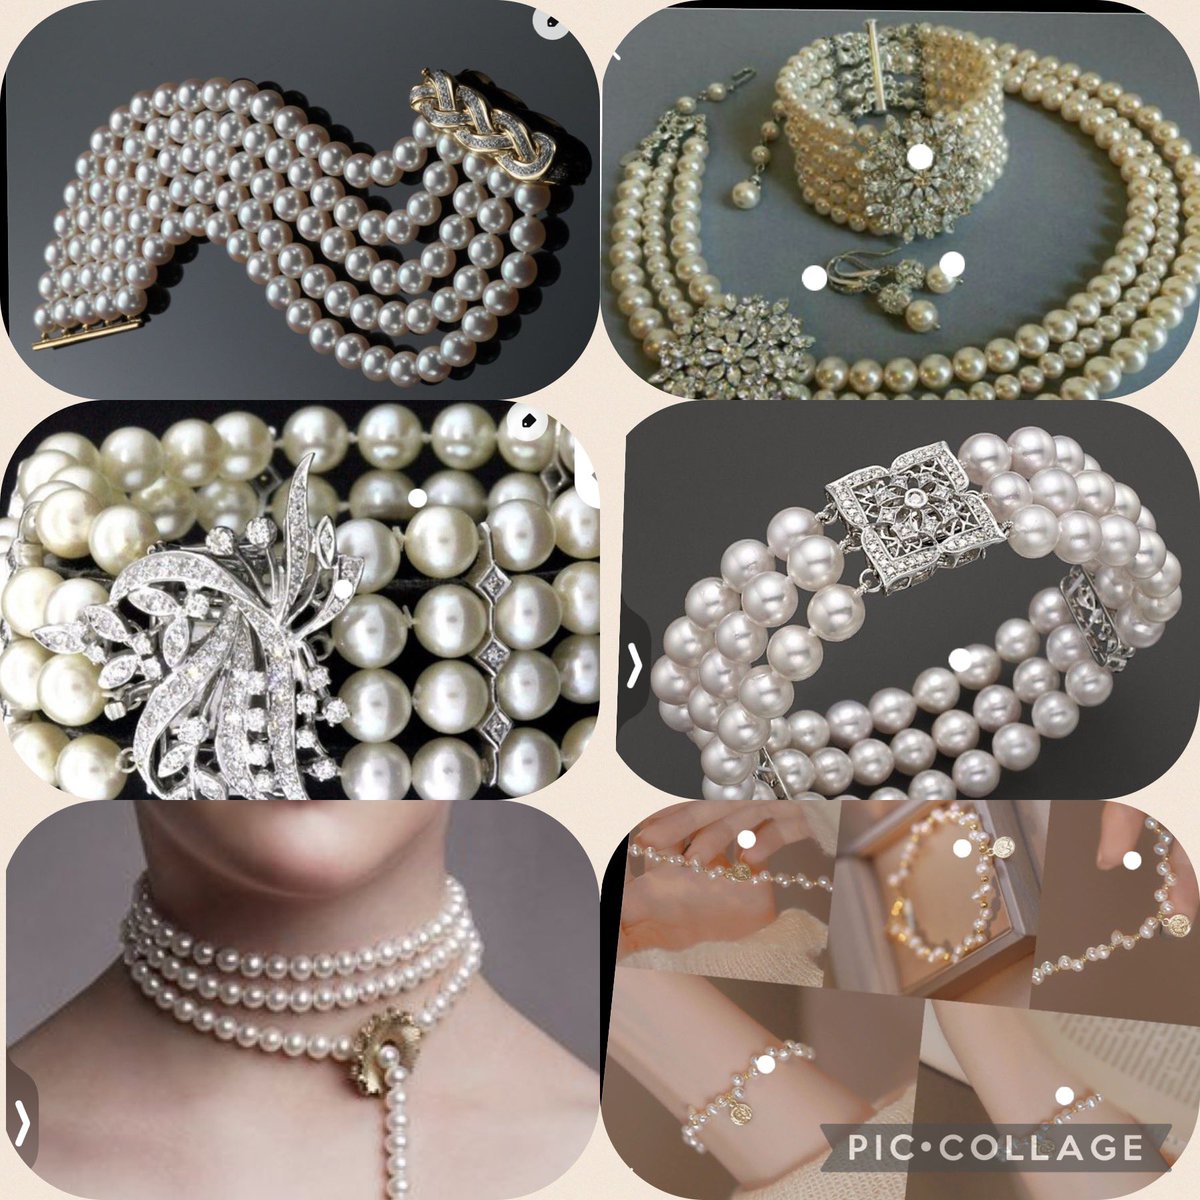 #zshq #zzst 🤶😅😂♥️🧑🏽‍🎄😅😂♥️🎅🏽😅😂♥️🤶😅😂🧑🏽‍🎄♥️😅😂🎅🏽 🎄ATTENTION SQUADDIES🎄..... WE HAVE HAD SOME OF THE BEAUTIFUL PEARLS YOU GATHERED YESTERDAY MADE INTO EXTRA CHRISTMAS PRESENTS FIR YOU MOMMAS. YEPP... JUSS TAKE WHAT YOU WANT (SECRETLY) AND HIDE UNTIL CHRISTMAS GIFT TIME.🎅🏽